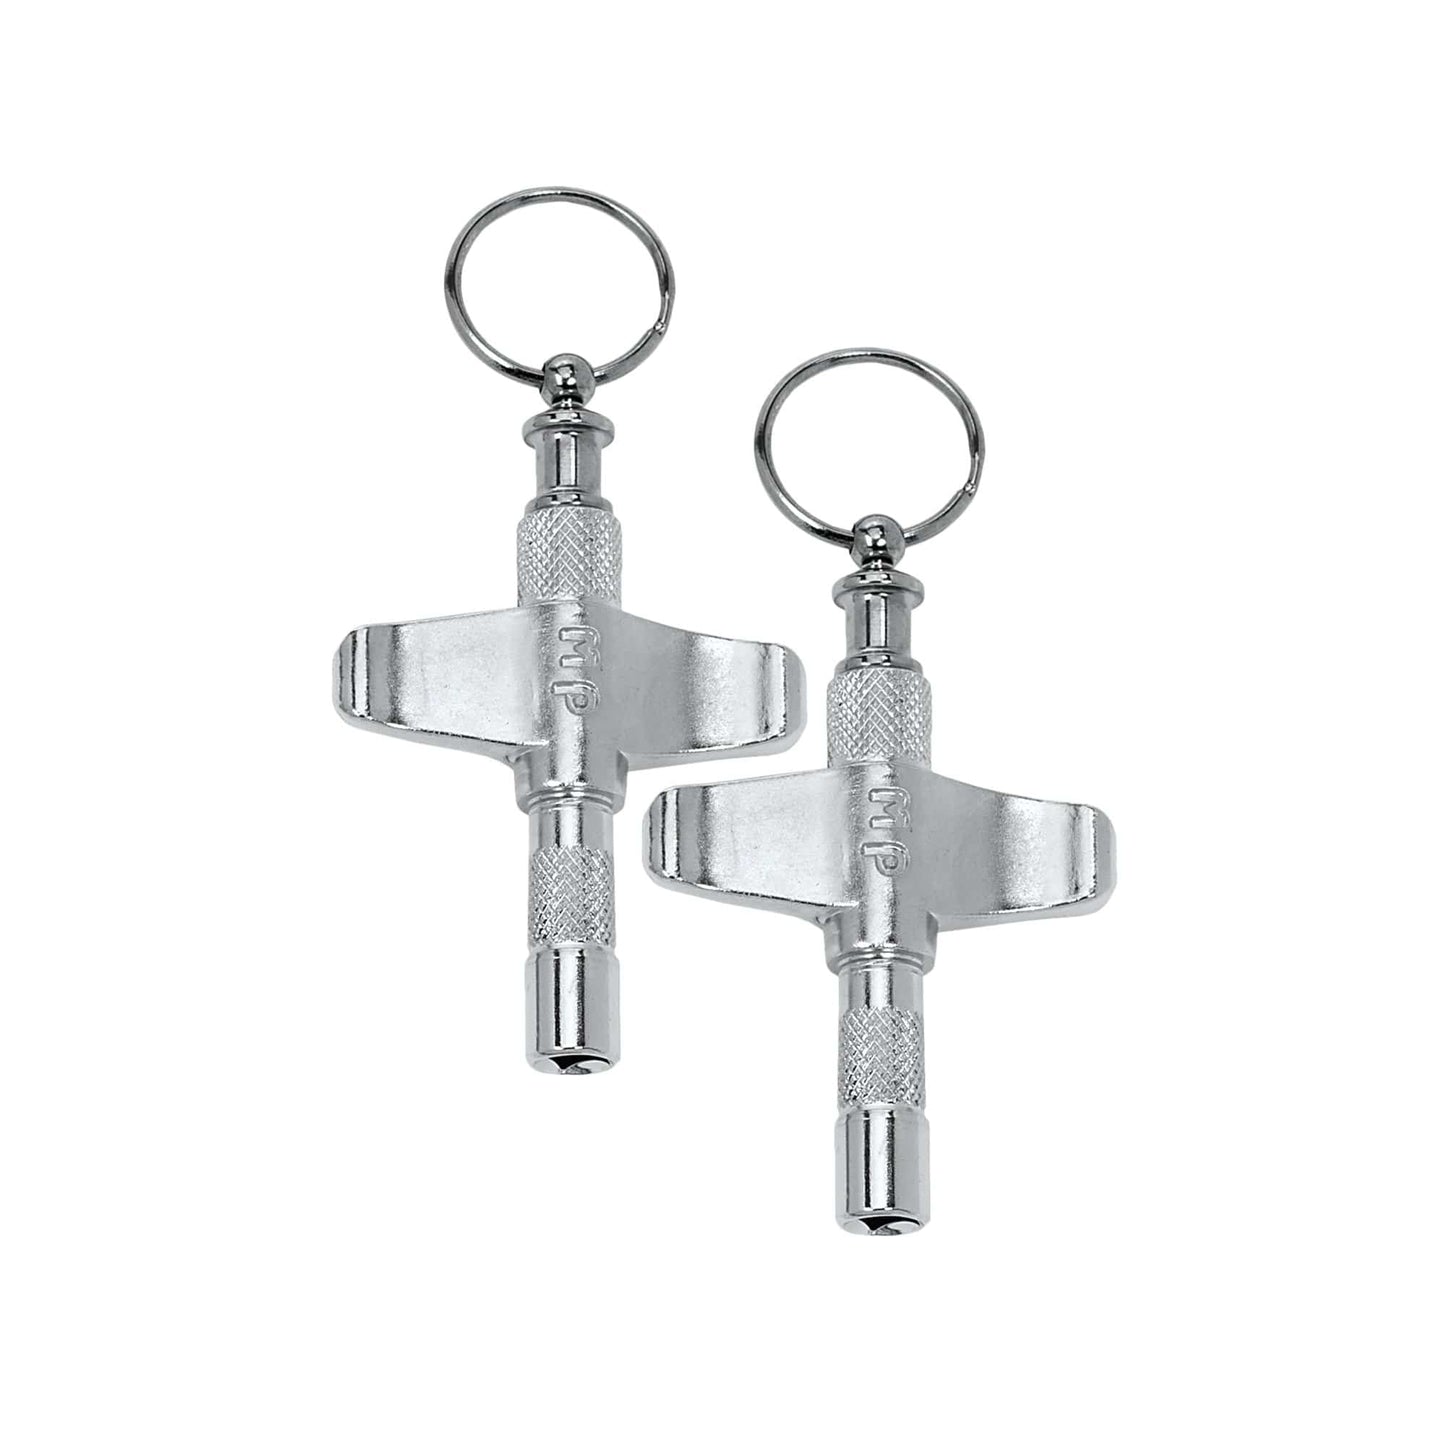 DW Drum Key Keychain (2 Pack Bundle) Drums and Percussion / Parts and Accessories / Drum Keys and Tuners